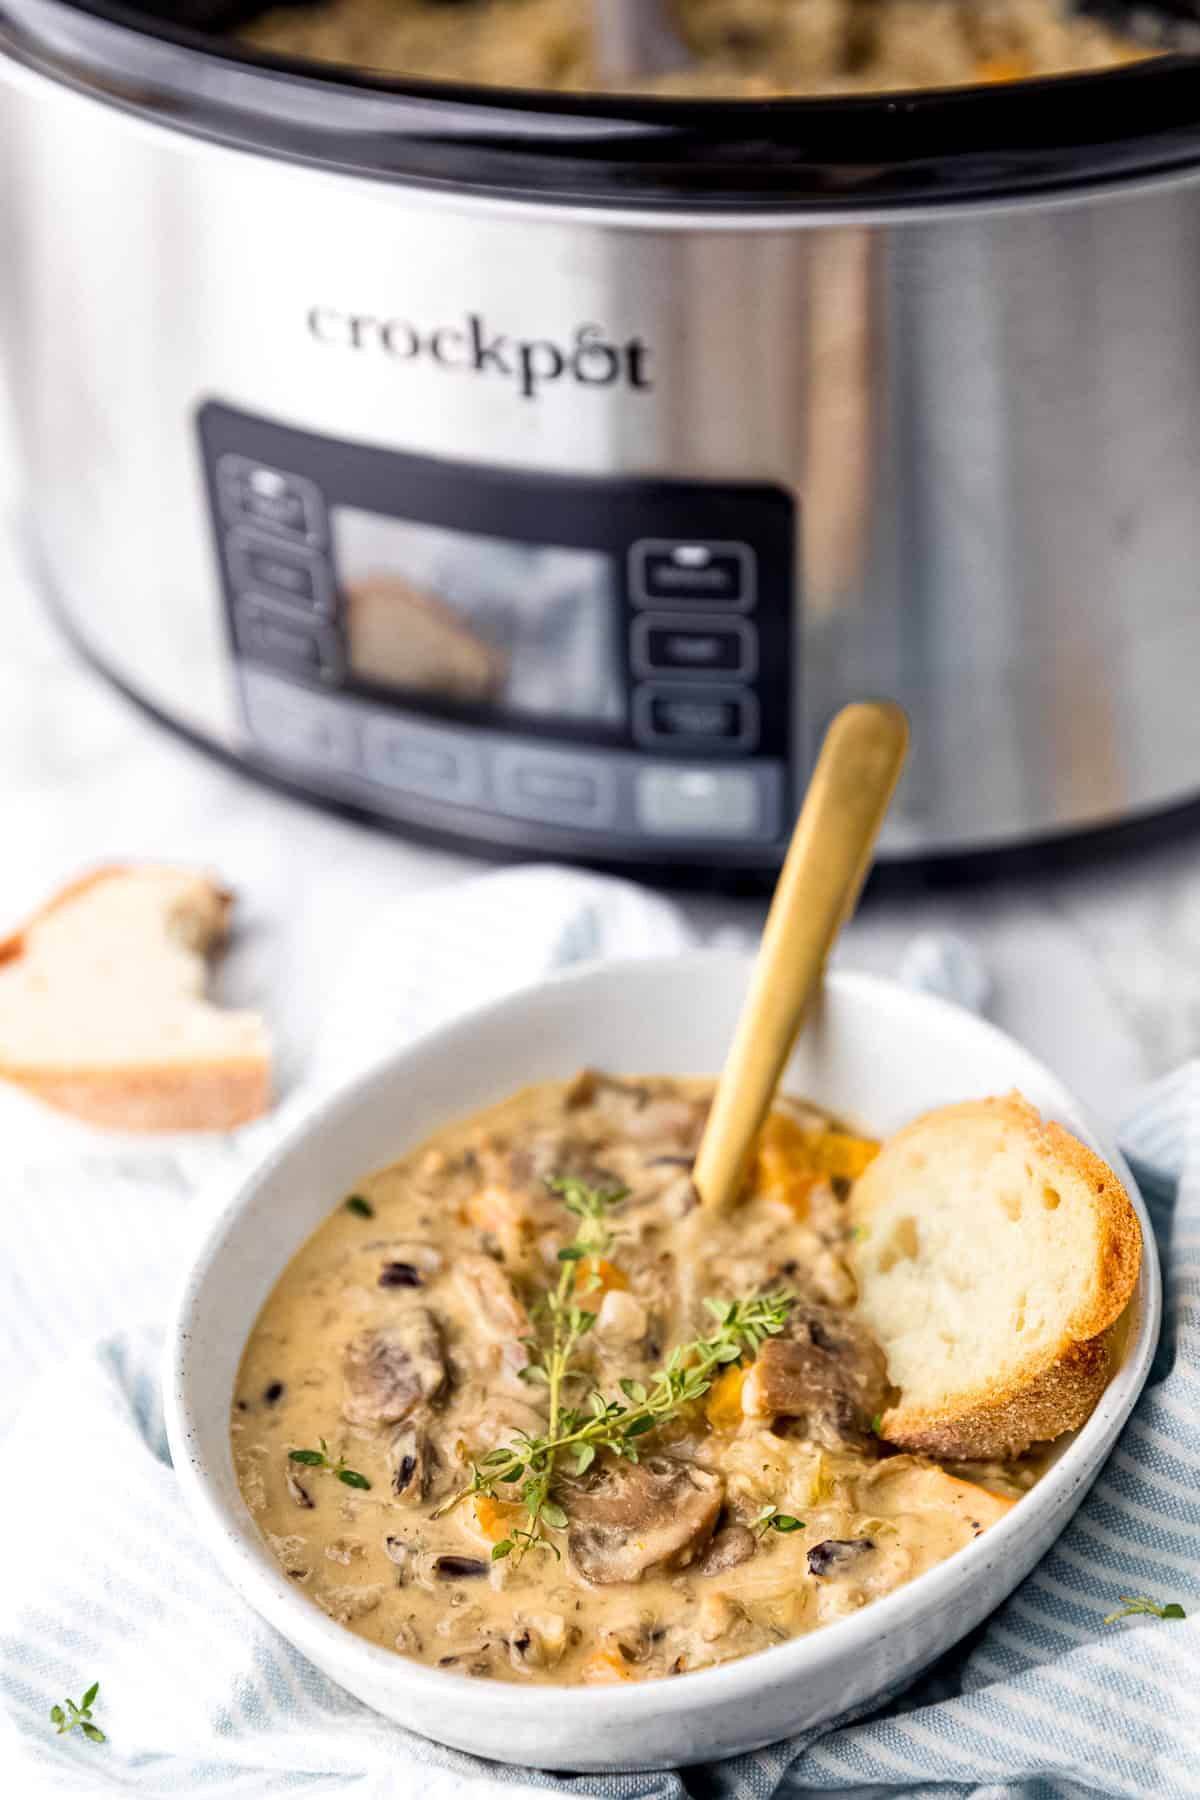 Crockpot in the background of a bowl of soup.